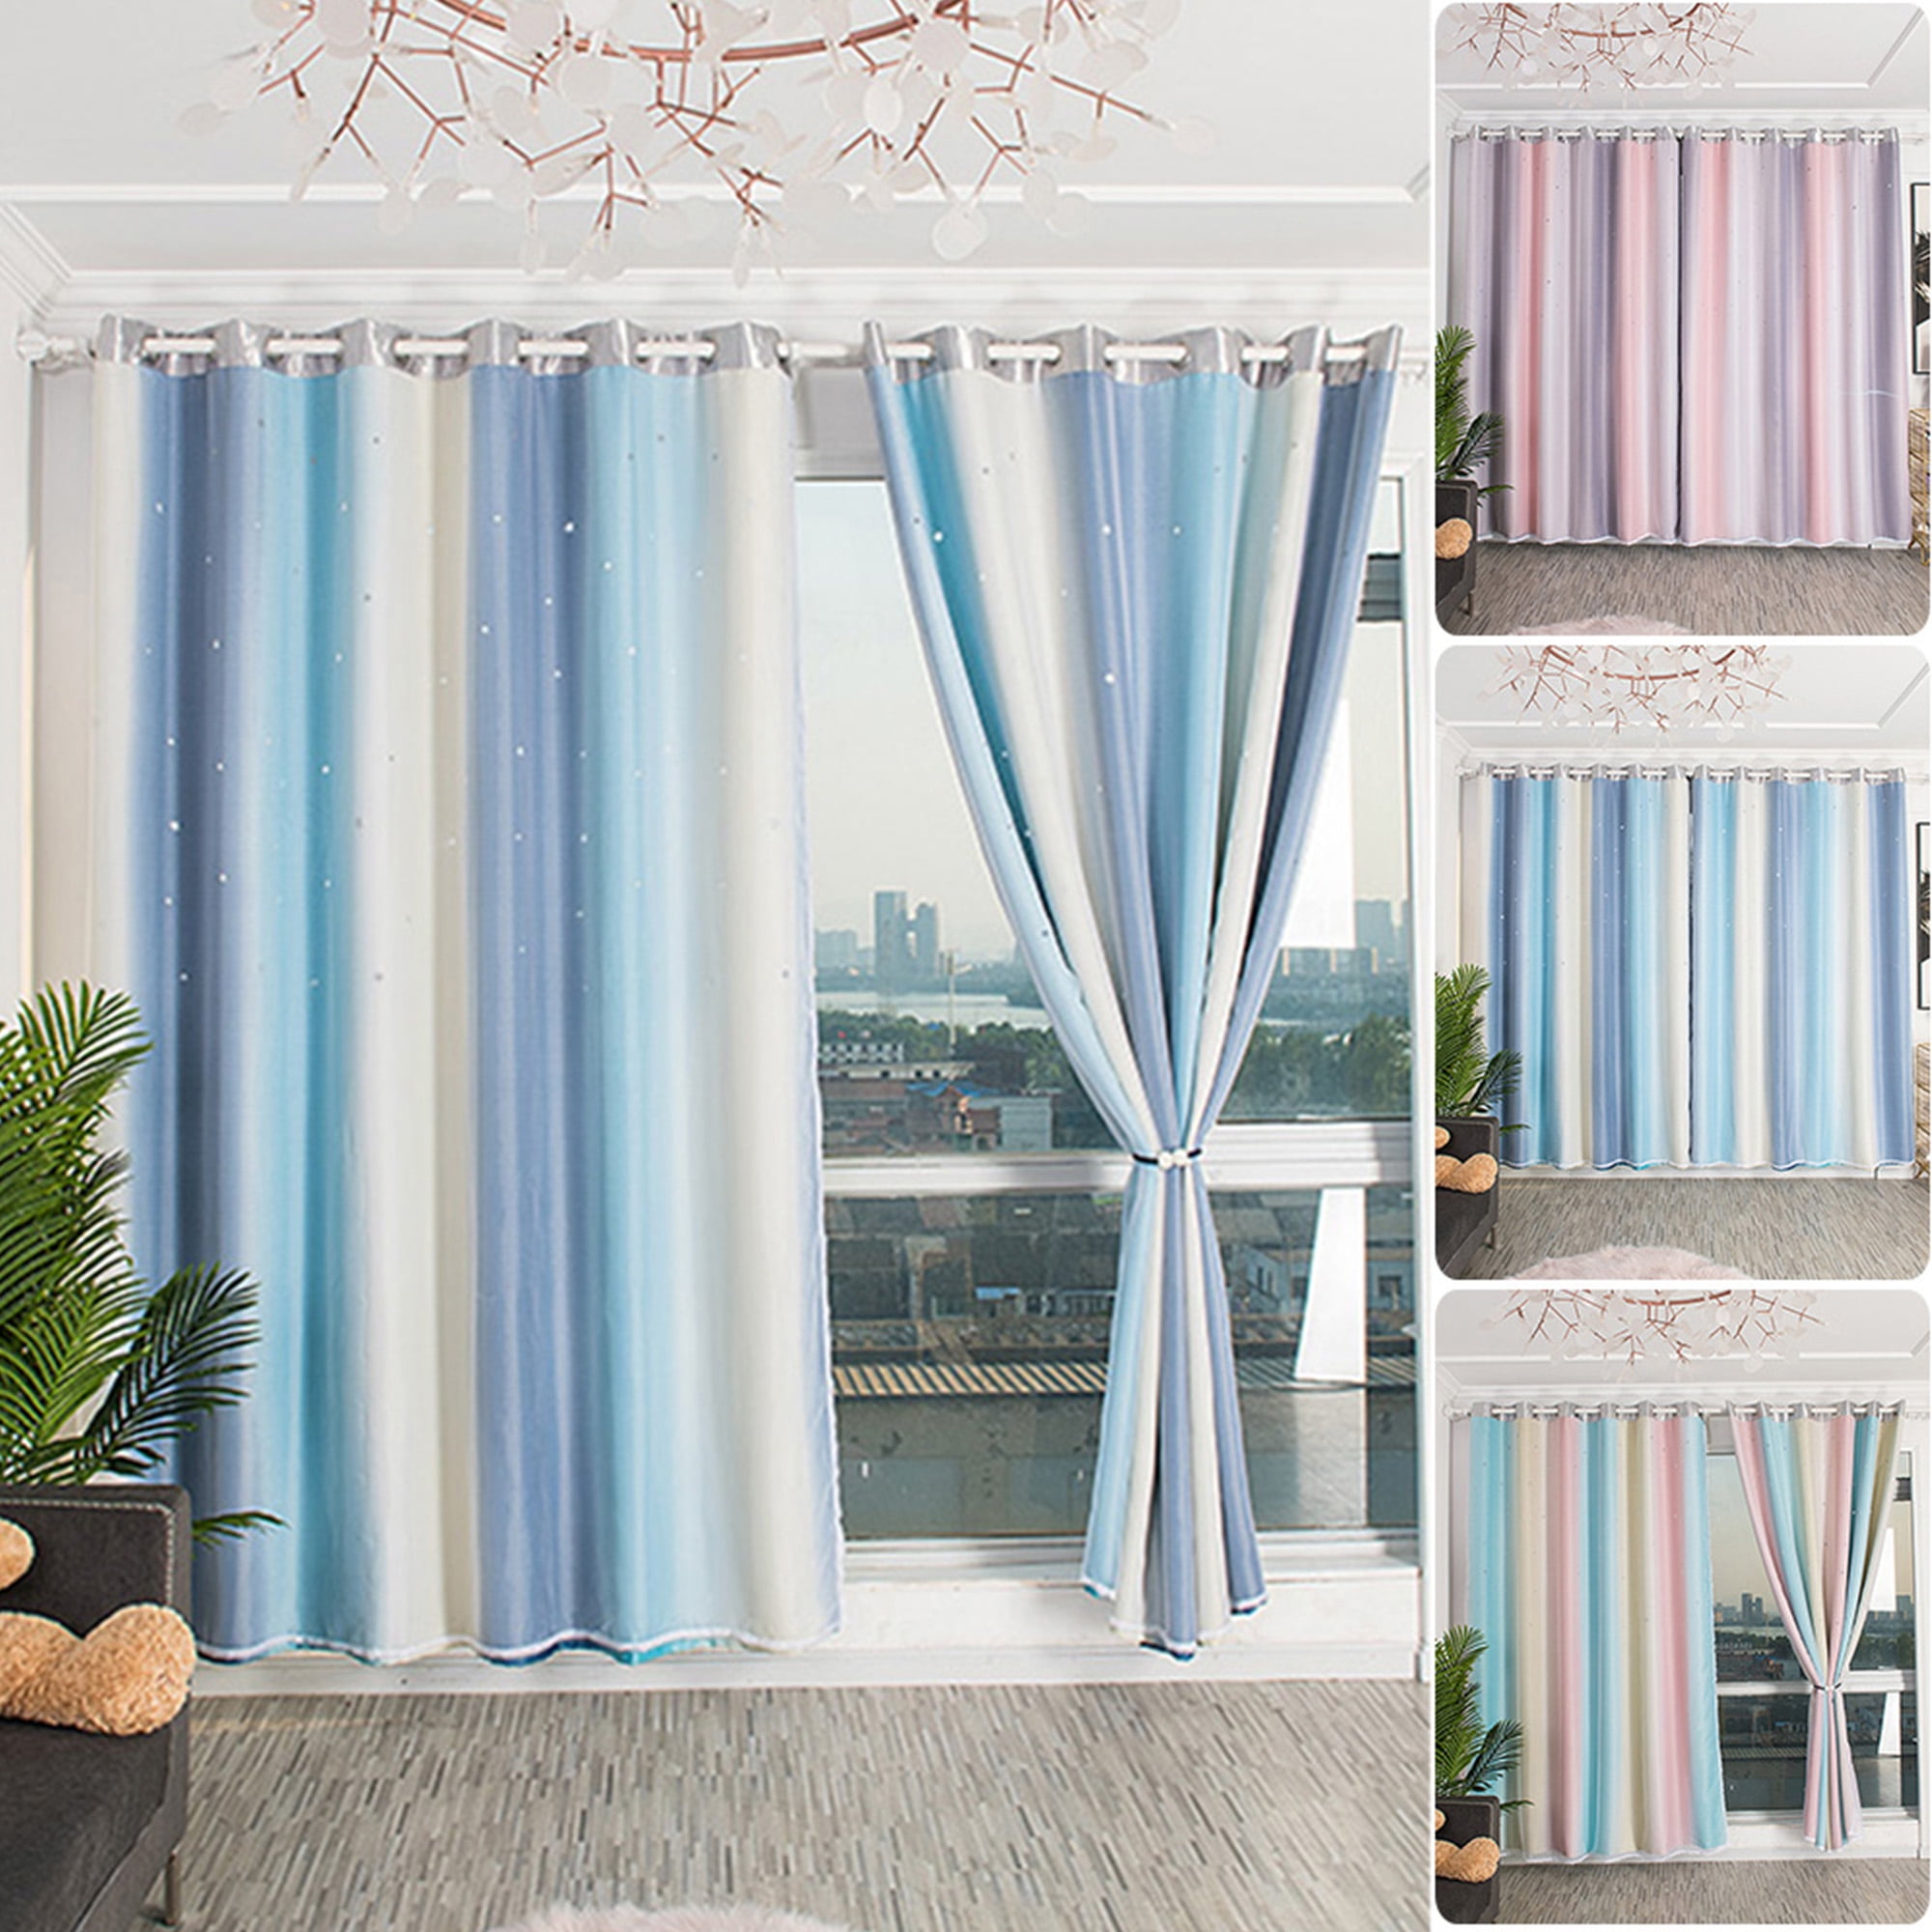 Window Curtains Blackout Thermal Room Kids Boy Girls Bedroom Decoration Ornament 